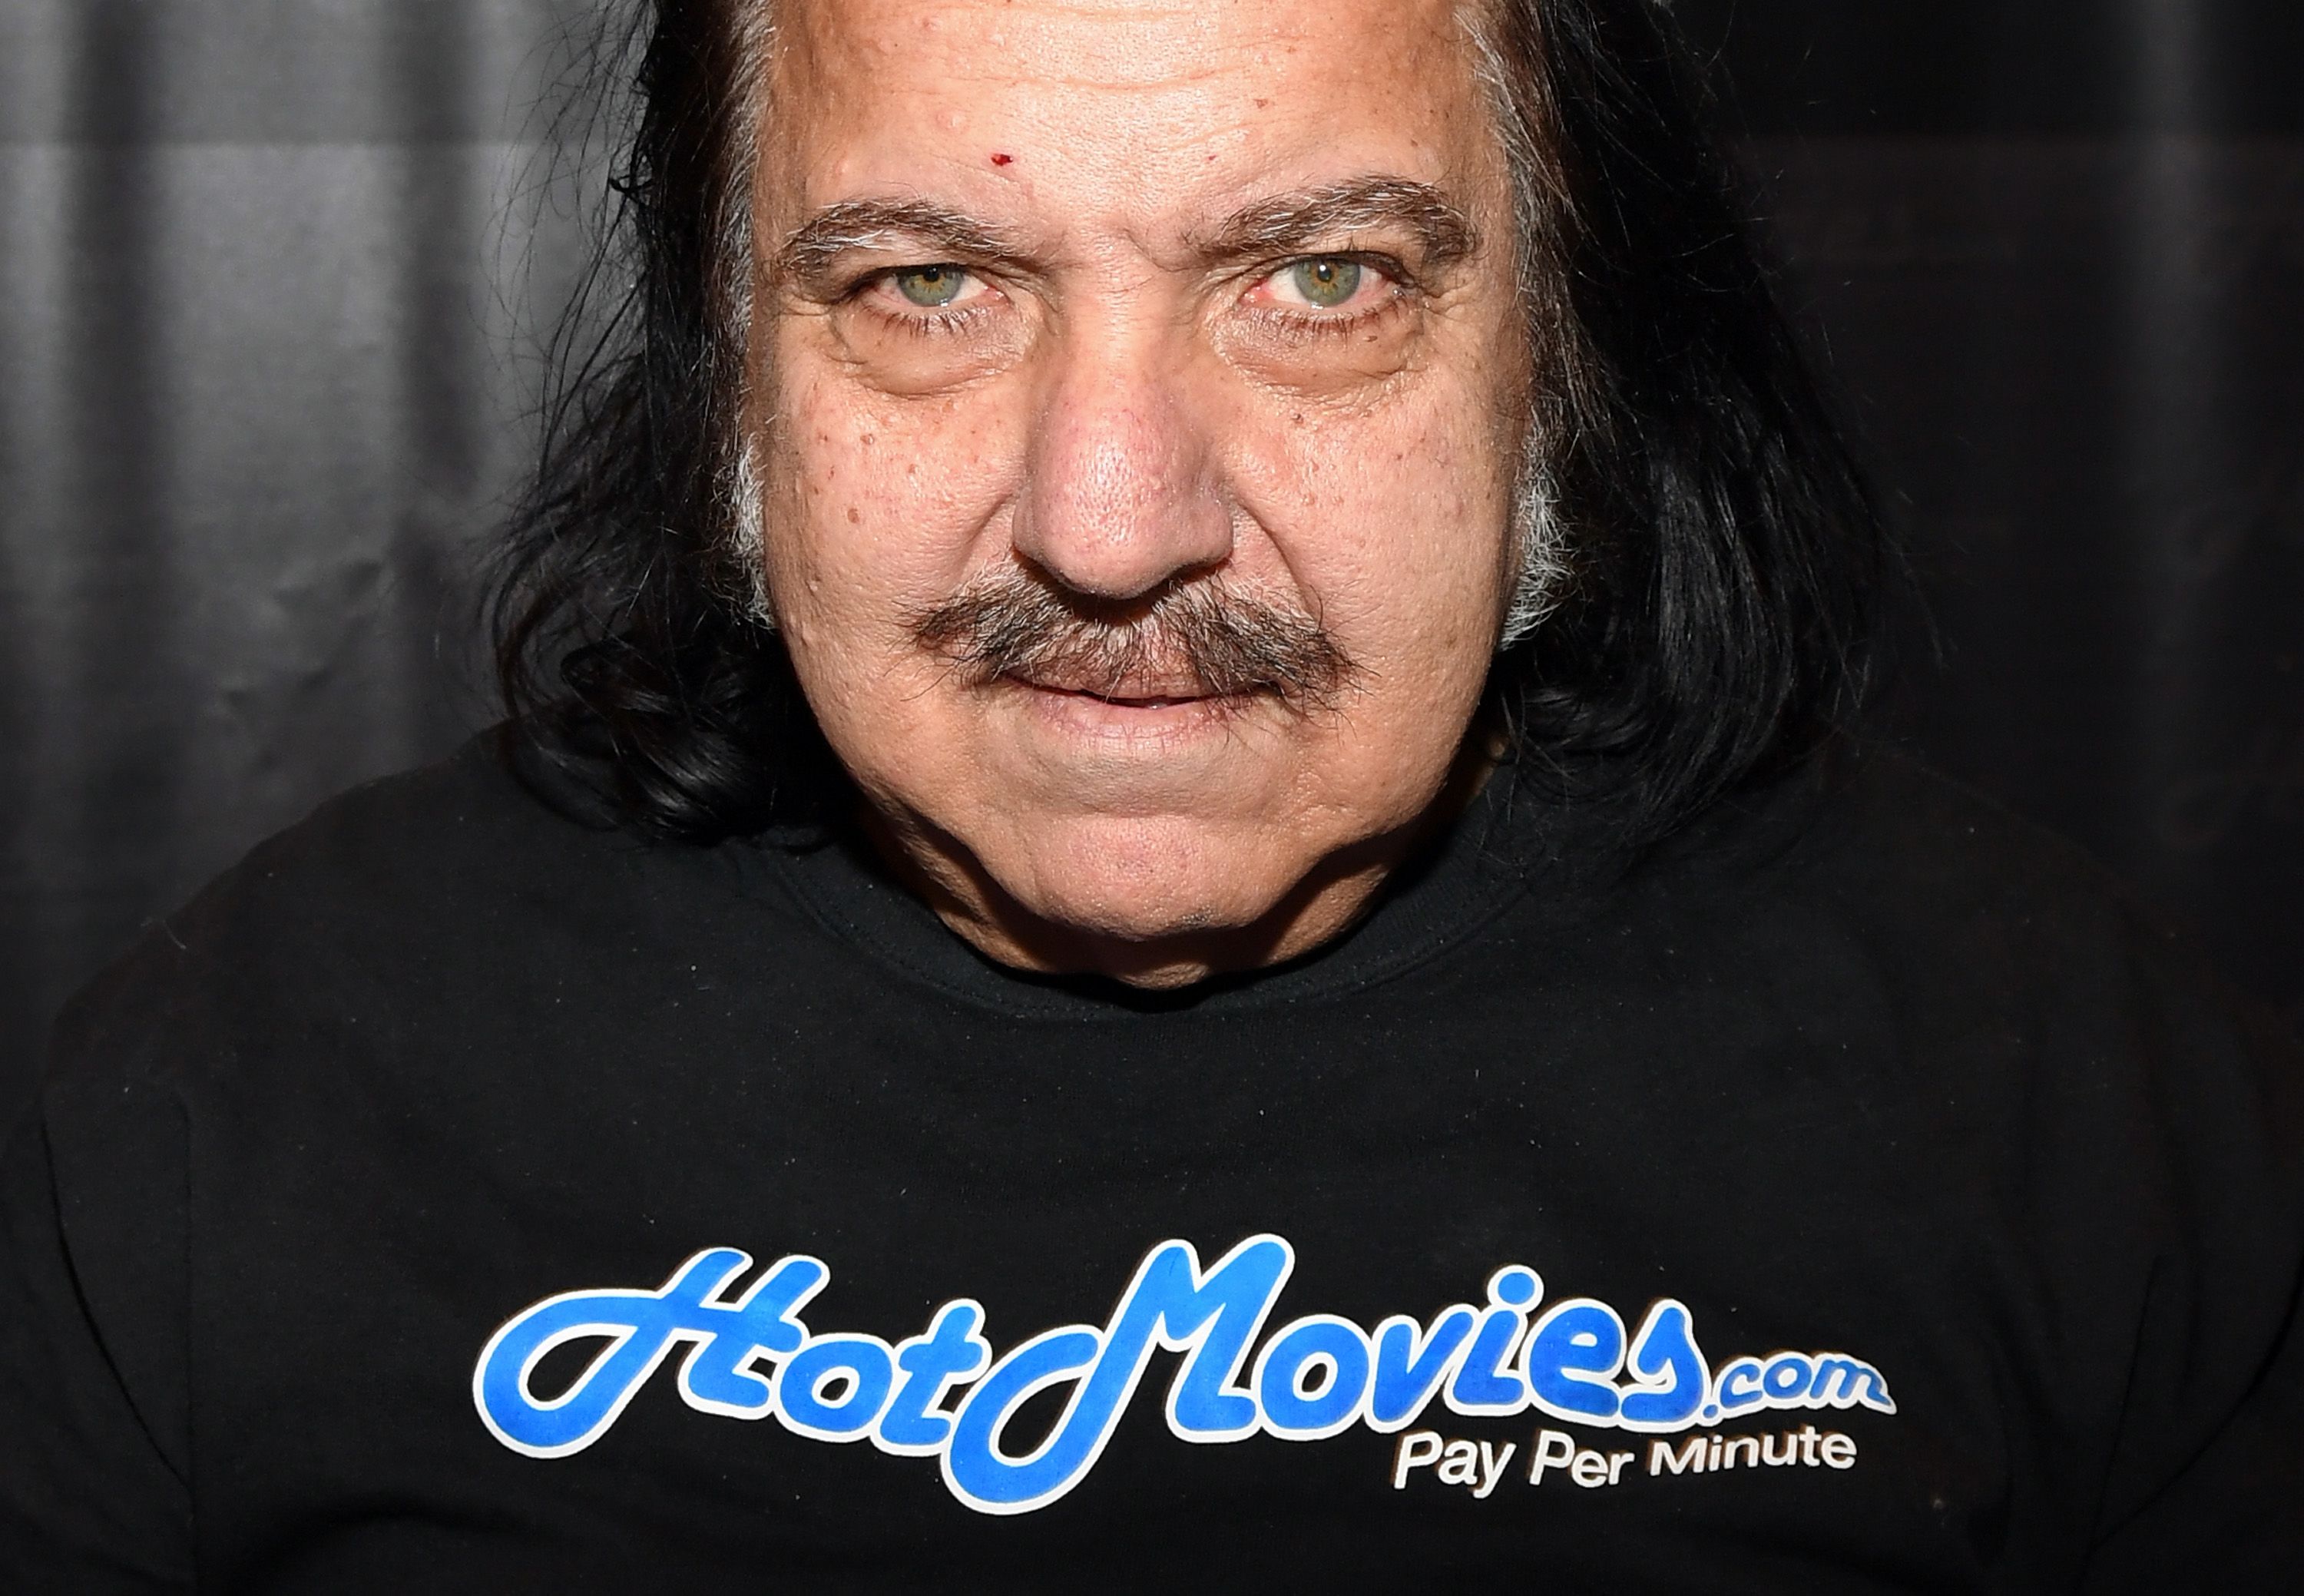 Ww Xxx Video English - Ron Jeremy, porn star, charged with sexually assaulting four women | CNN